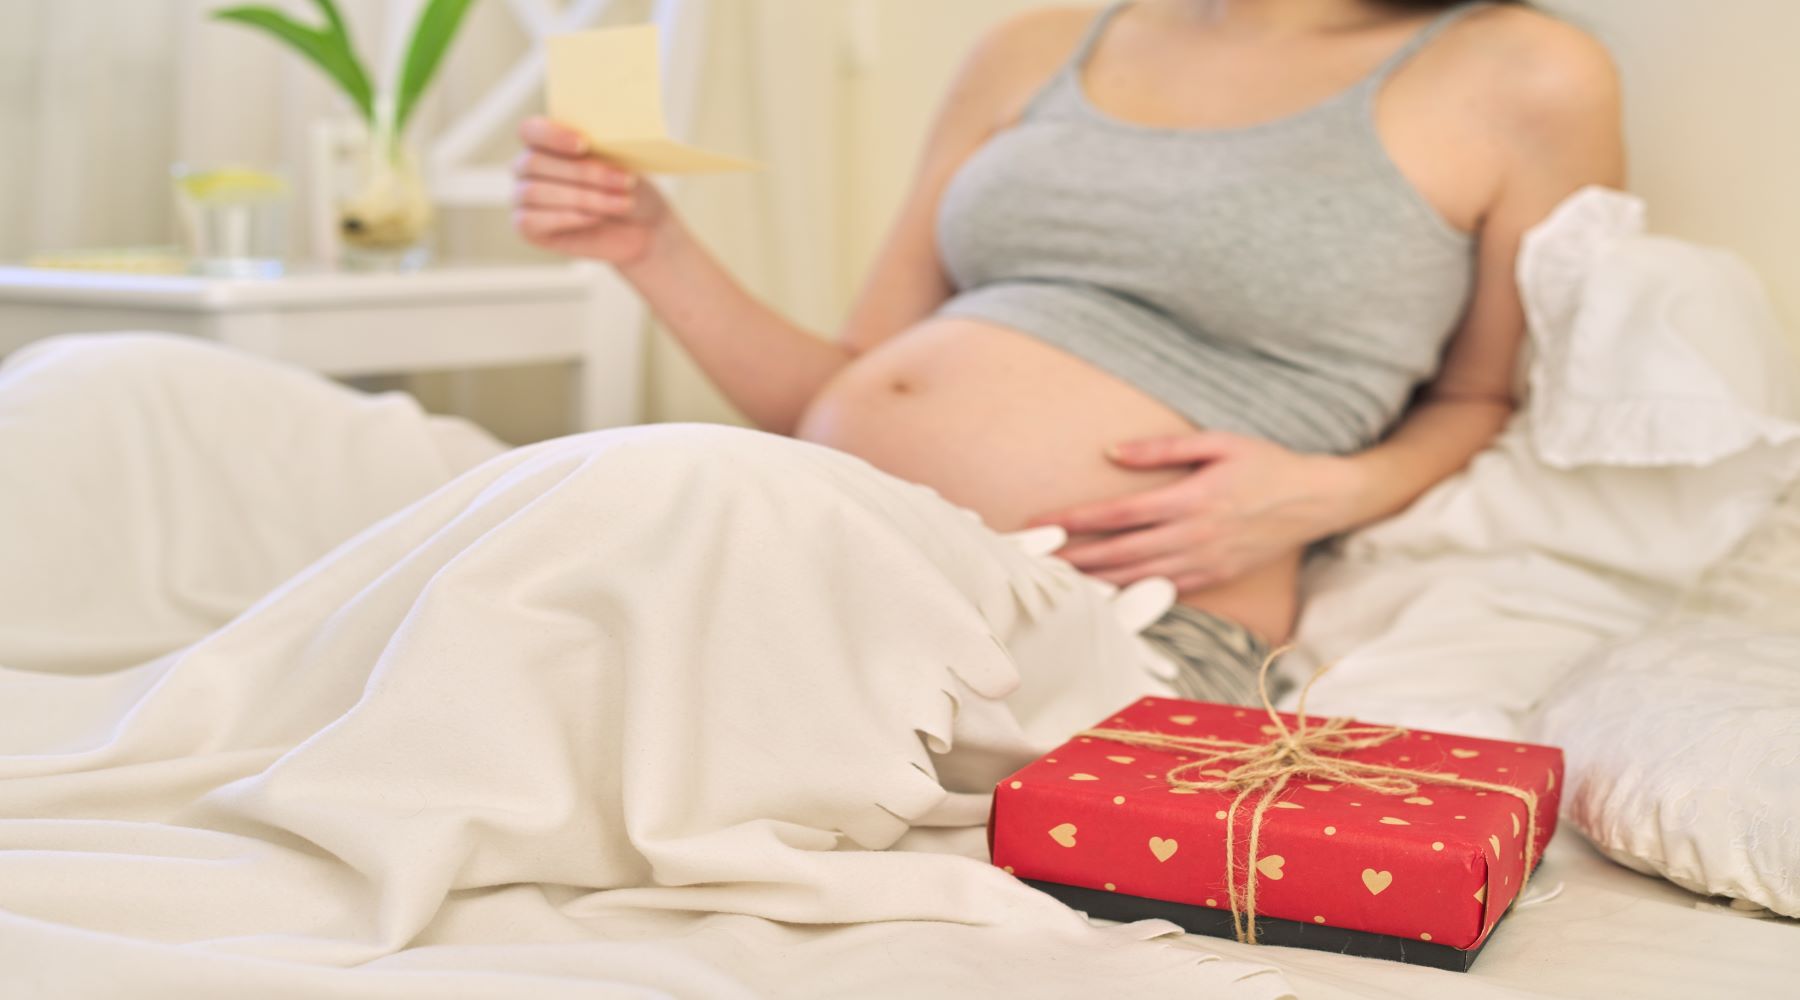 22 Thoughtful Gifts for Pregnant Women That She'll Love | Gifts for pregnant  women, Daughter in law gifts, Expecting mother gifts